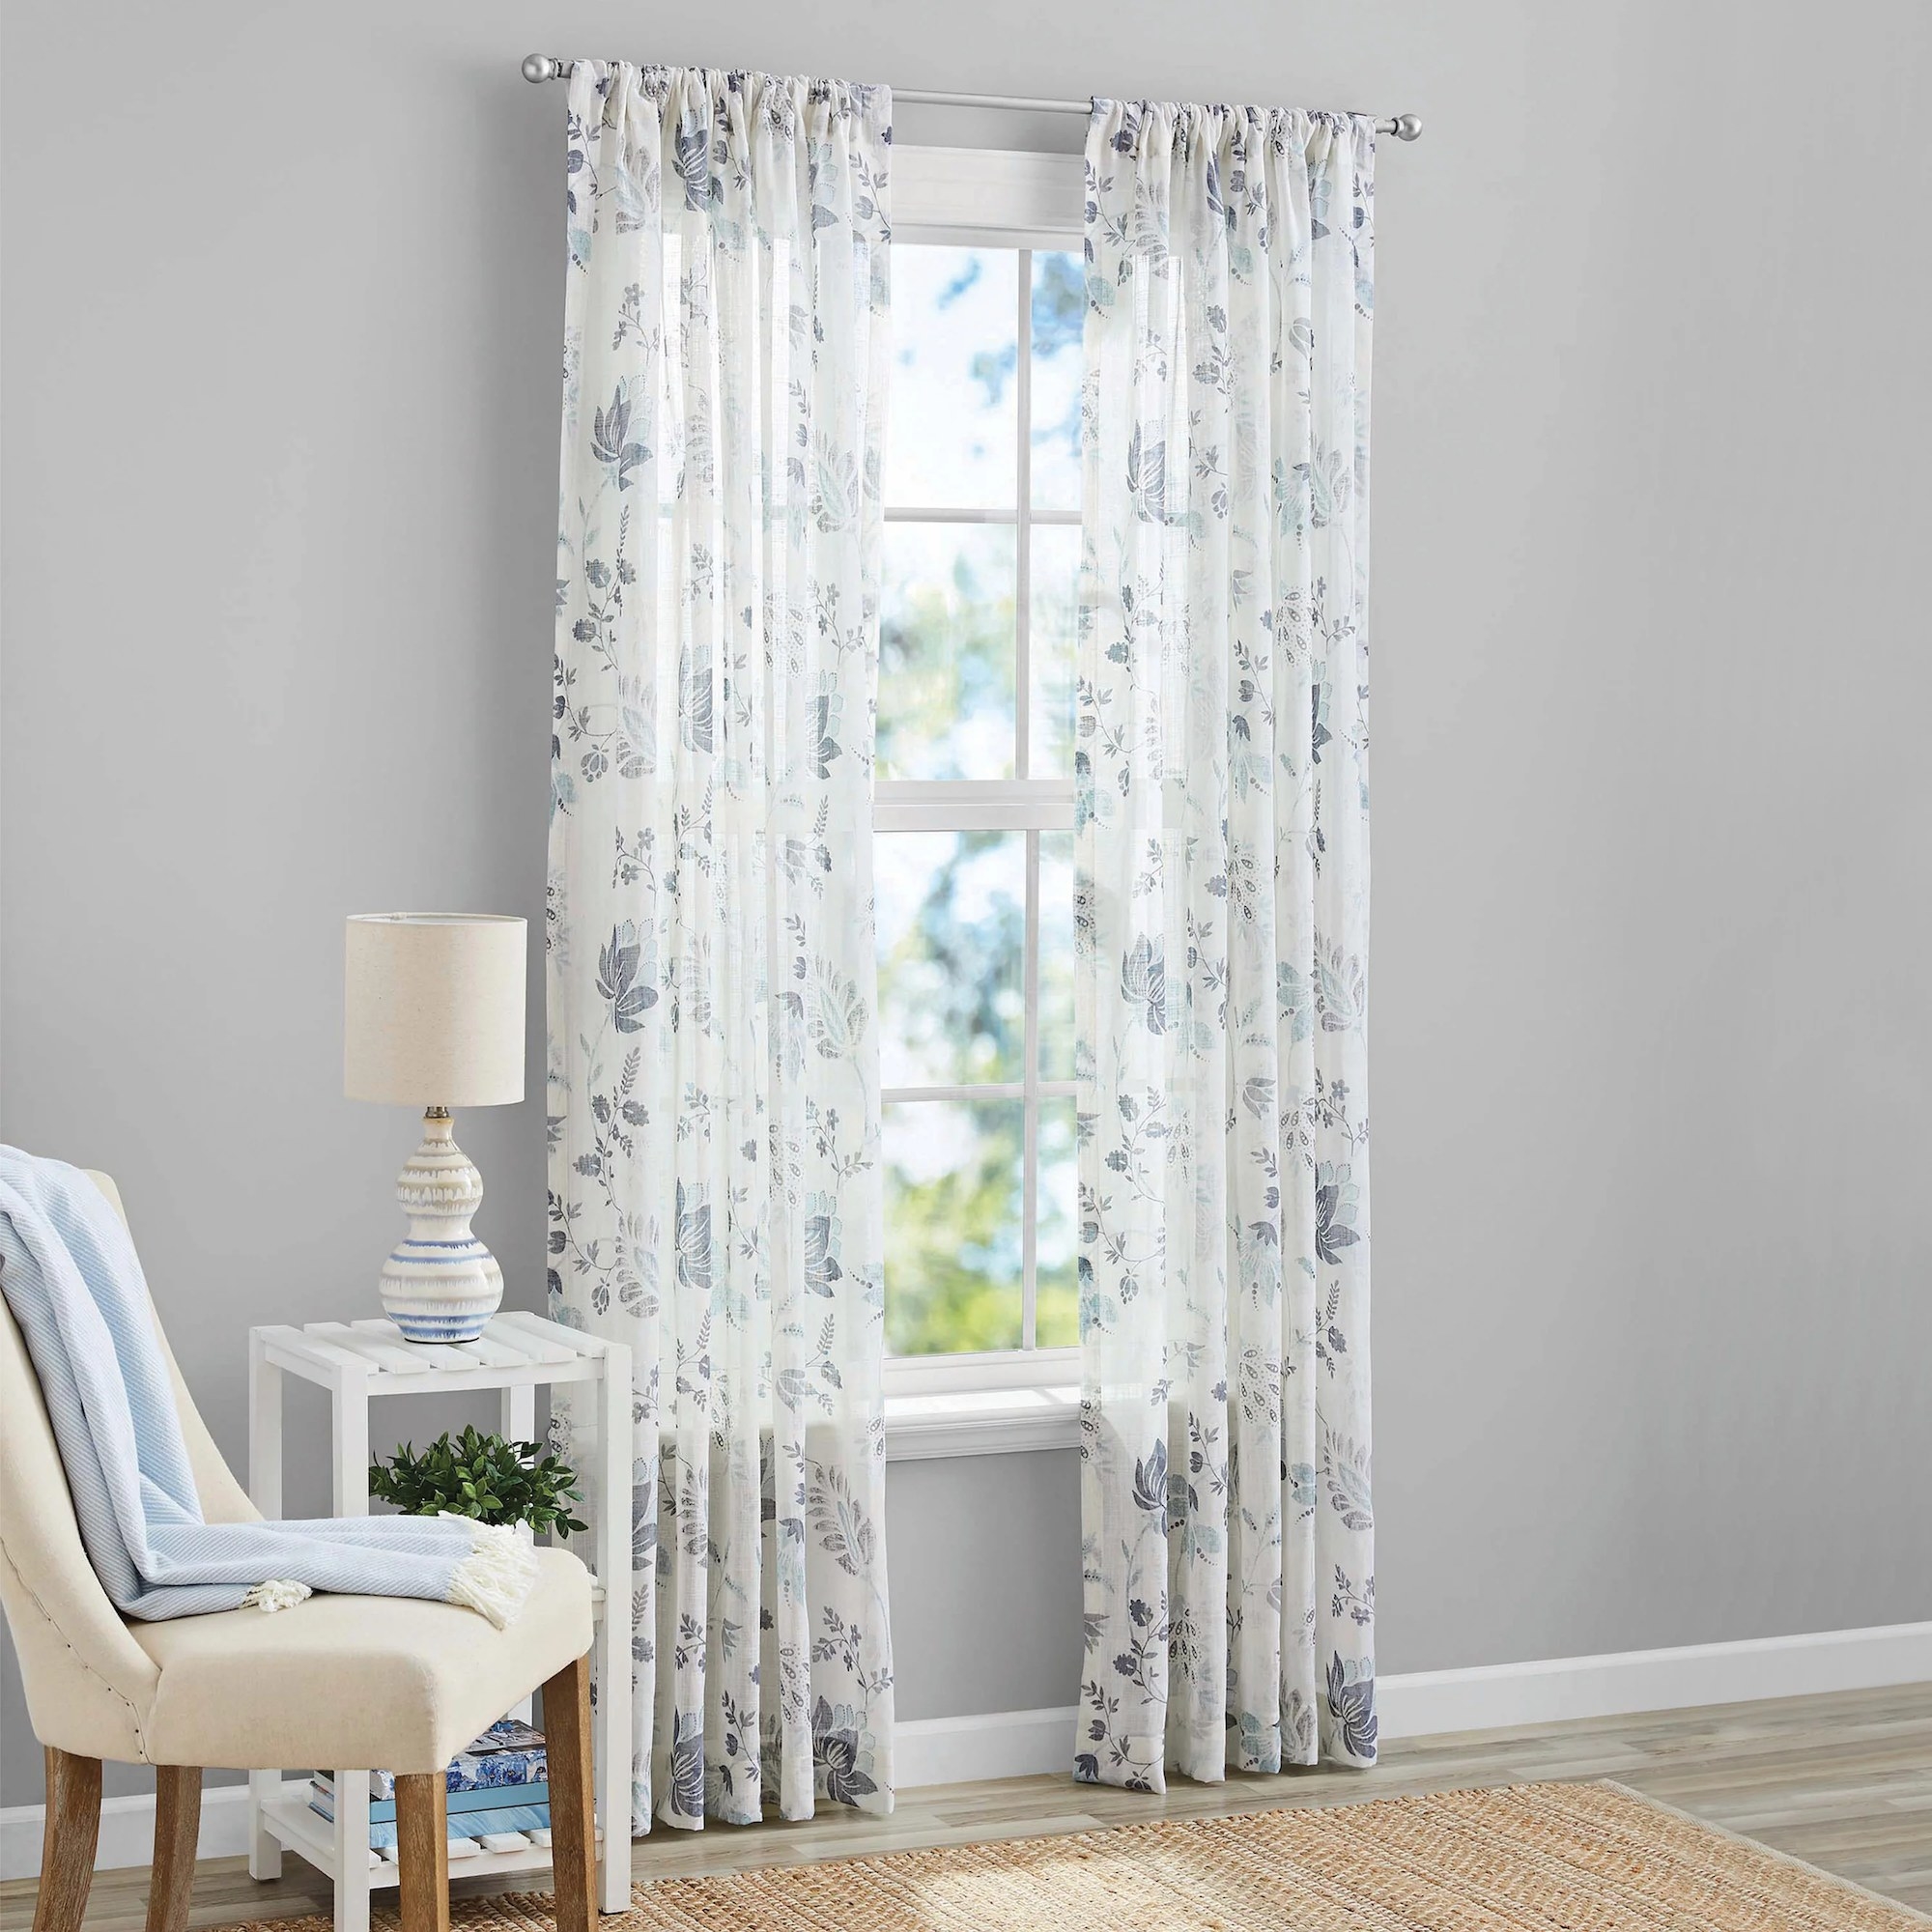 A floral curtain panel on either side of a window letting a fair amount of light in